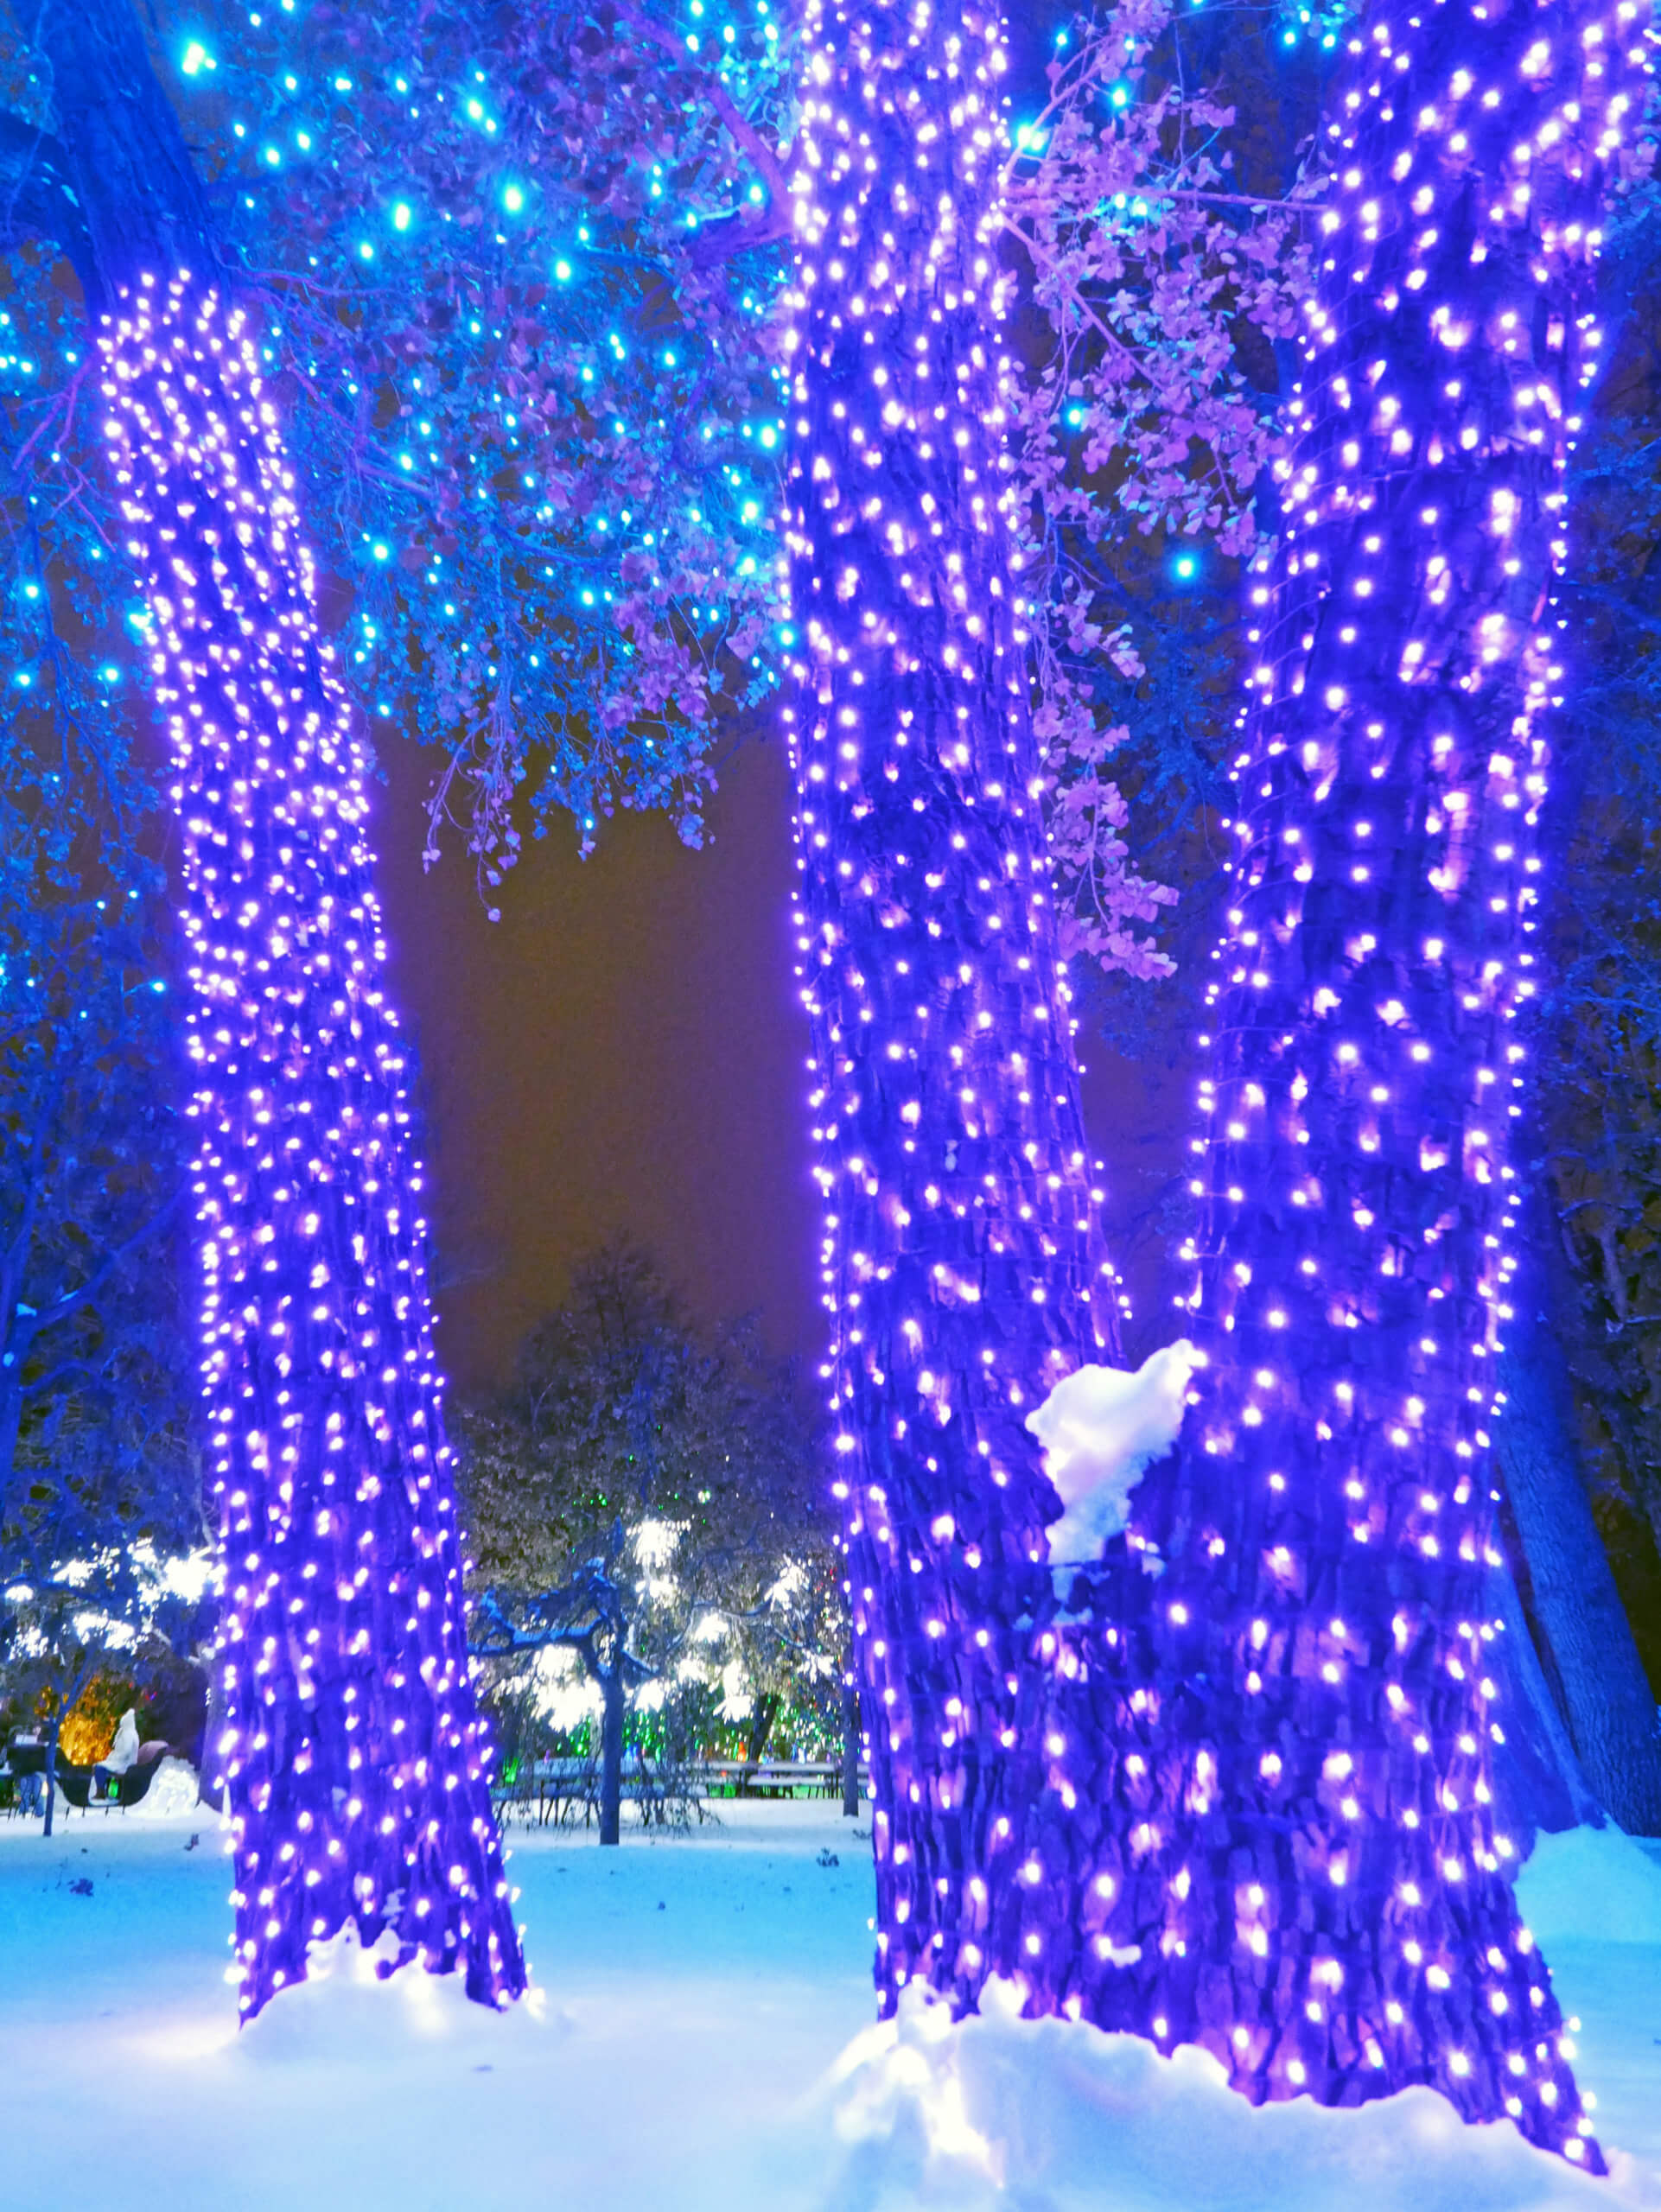 A towering tree decorated with purple and teal holiday lights at Hudson Gardens near Denver, Colorado